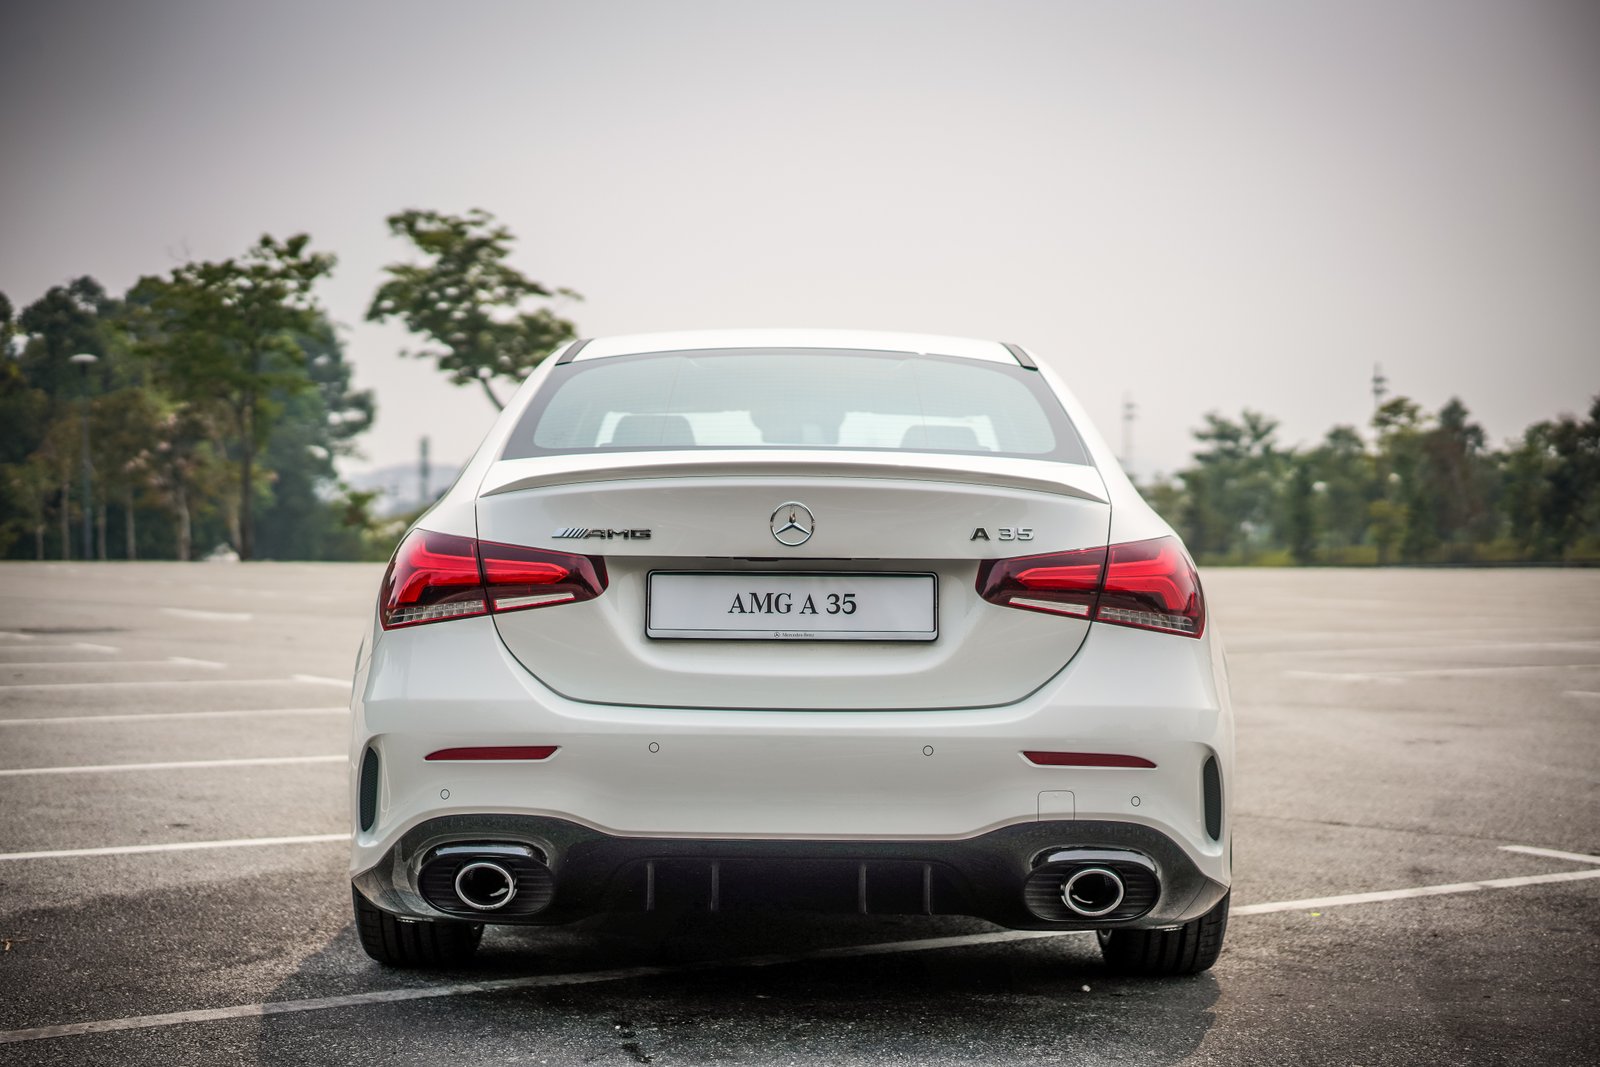 Mercedes-AMG A 35 launched with an estimated price of RM348,888